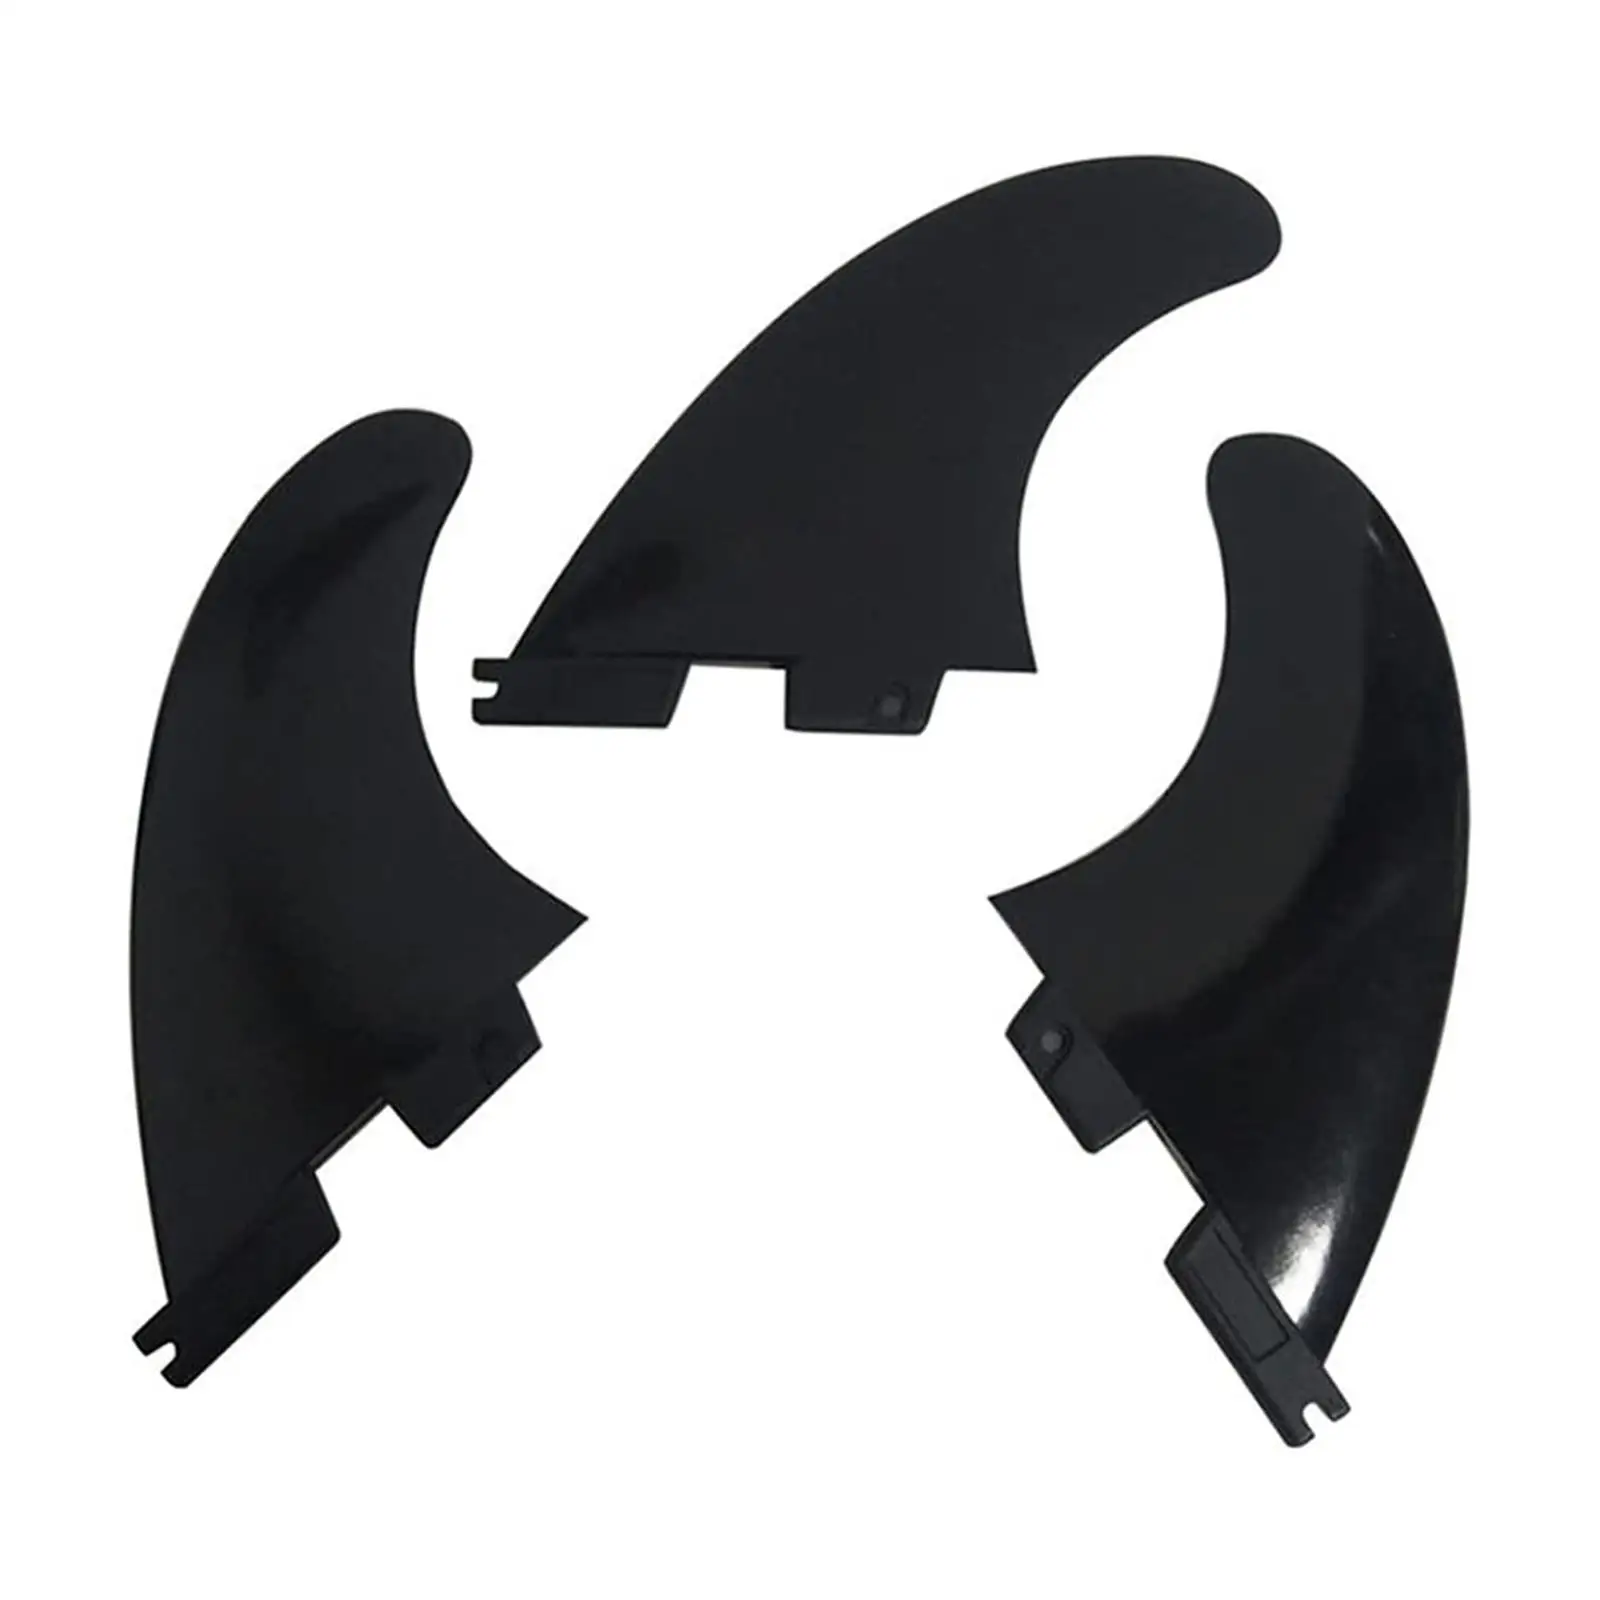 3Pcs Surfboard Fins Detachable Quick Release Surfing Fin Paddleboard Fin for